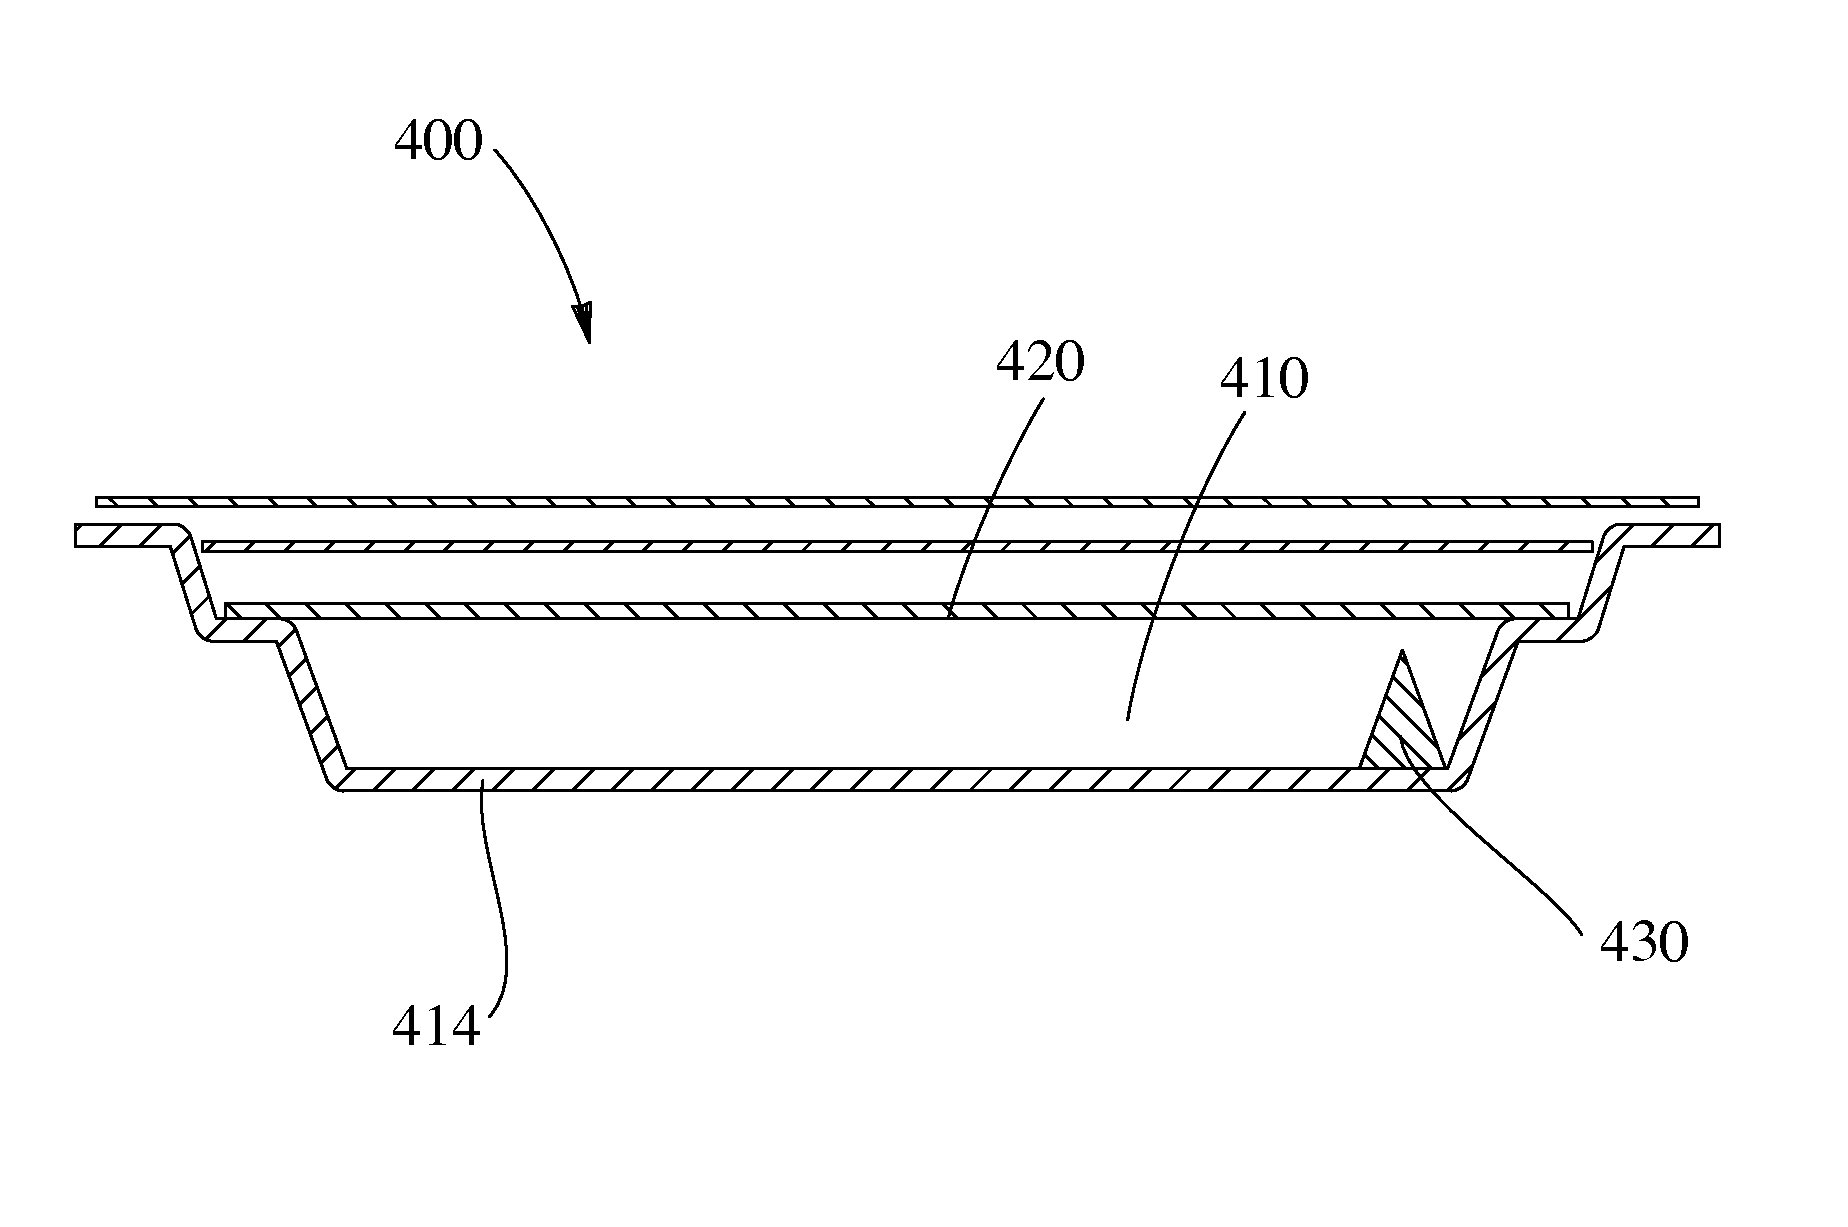 Apparatus for delivering a volatile material